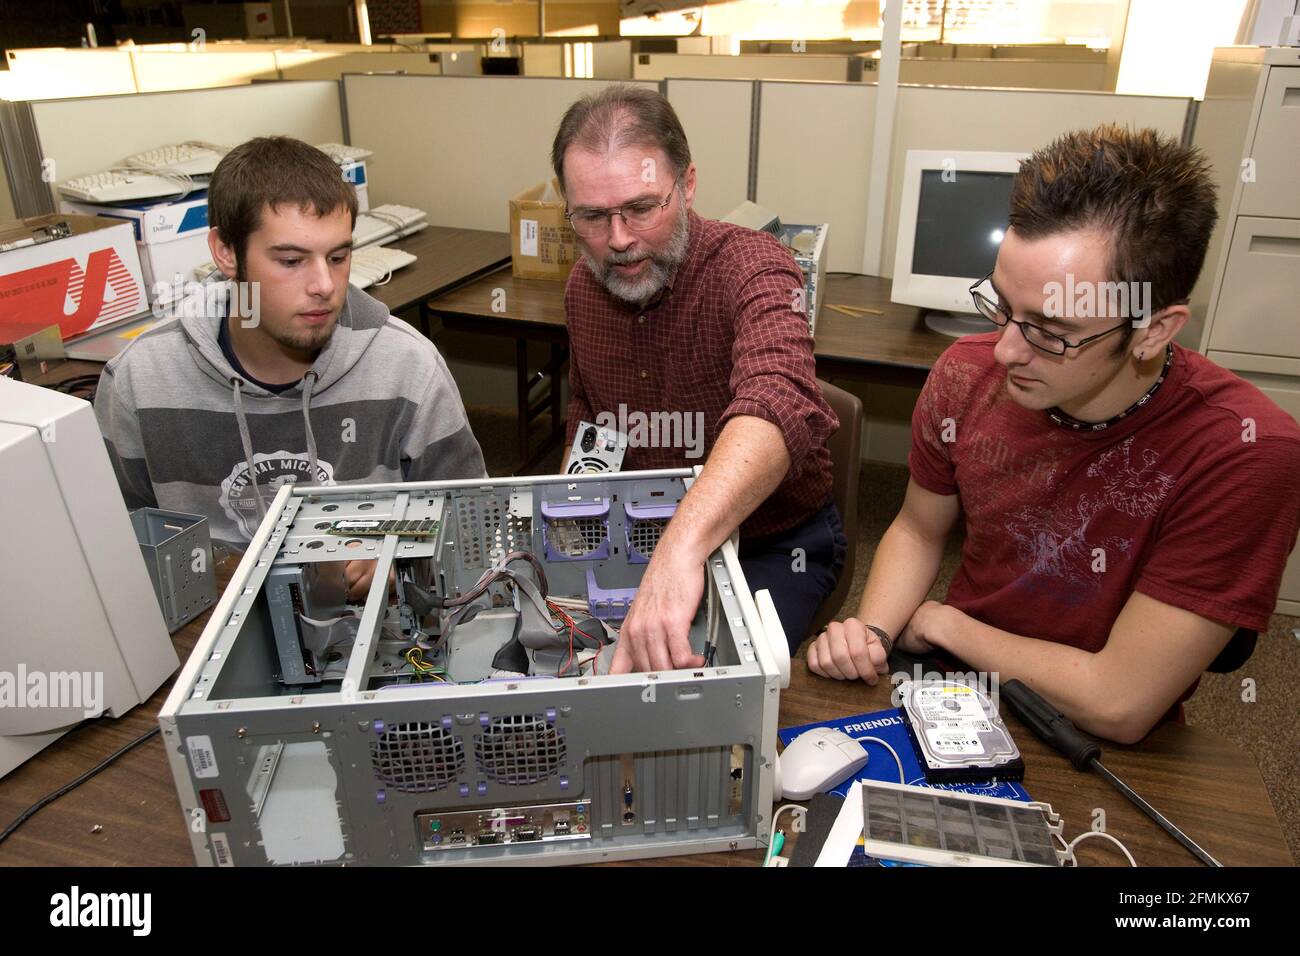 Teacher instructs two high school students in vocational, computer repair class Stock Photo